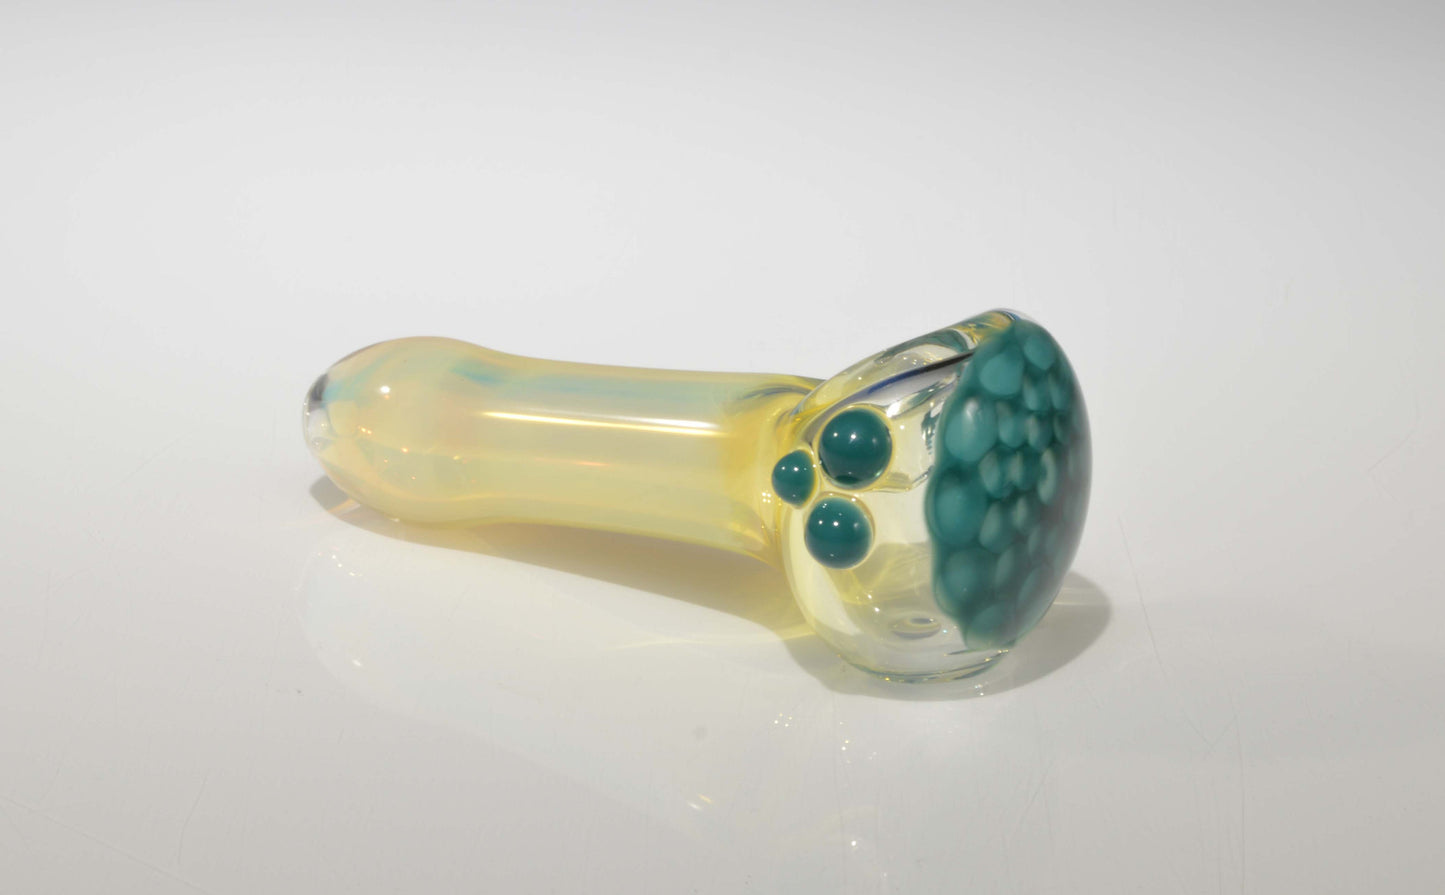 CK Glass: Fumed Spoon with Honeycomb